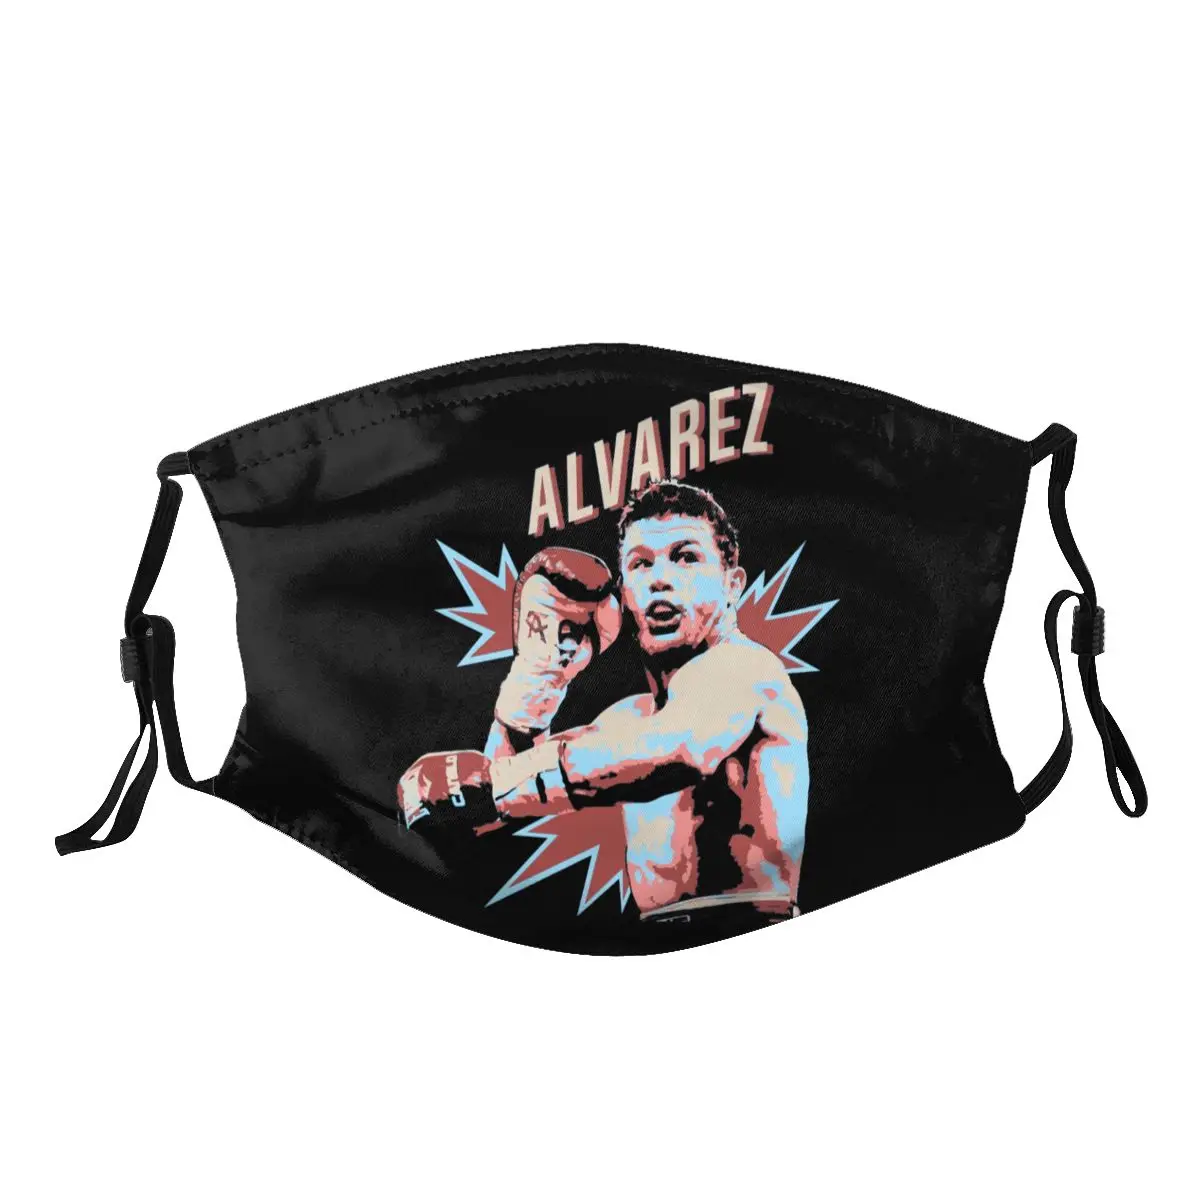 

Anime Saul Canelos Alvarez Boxing Vintage Retro Classic Activated Carbon Filter Mask Funny Novelty R257 ｠Guise